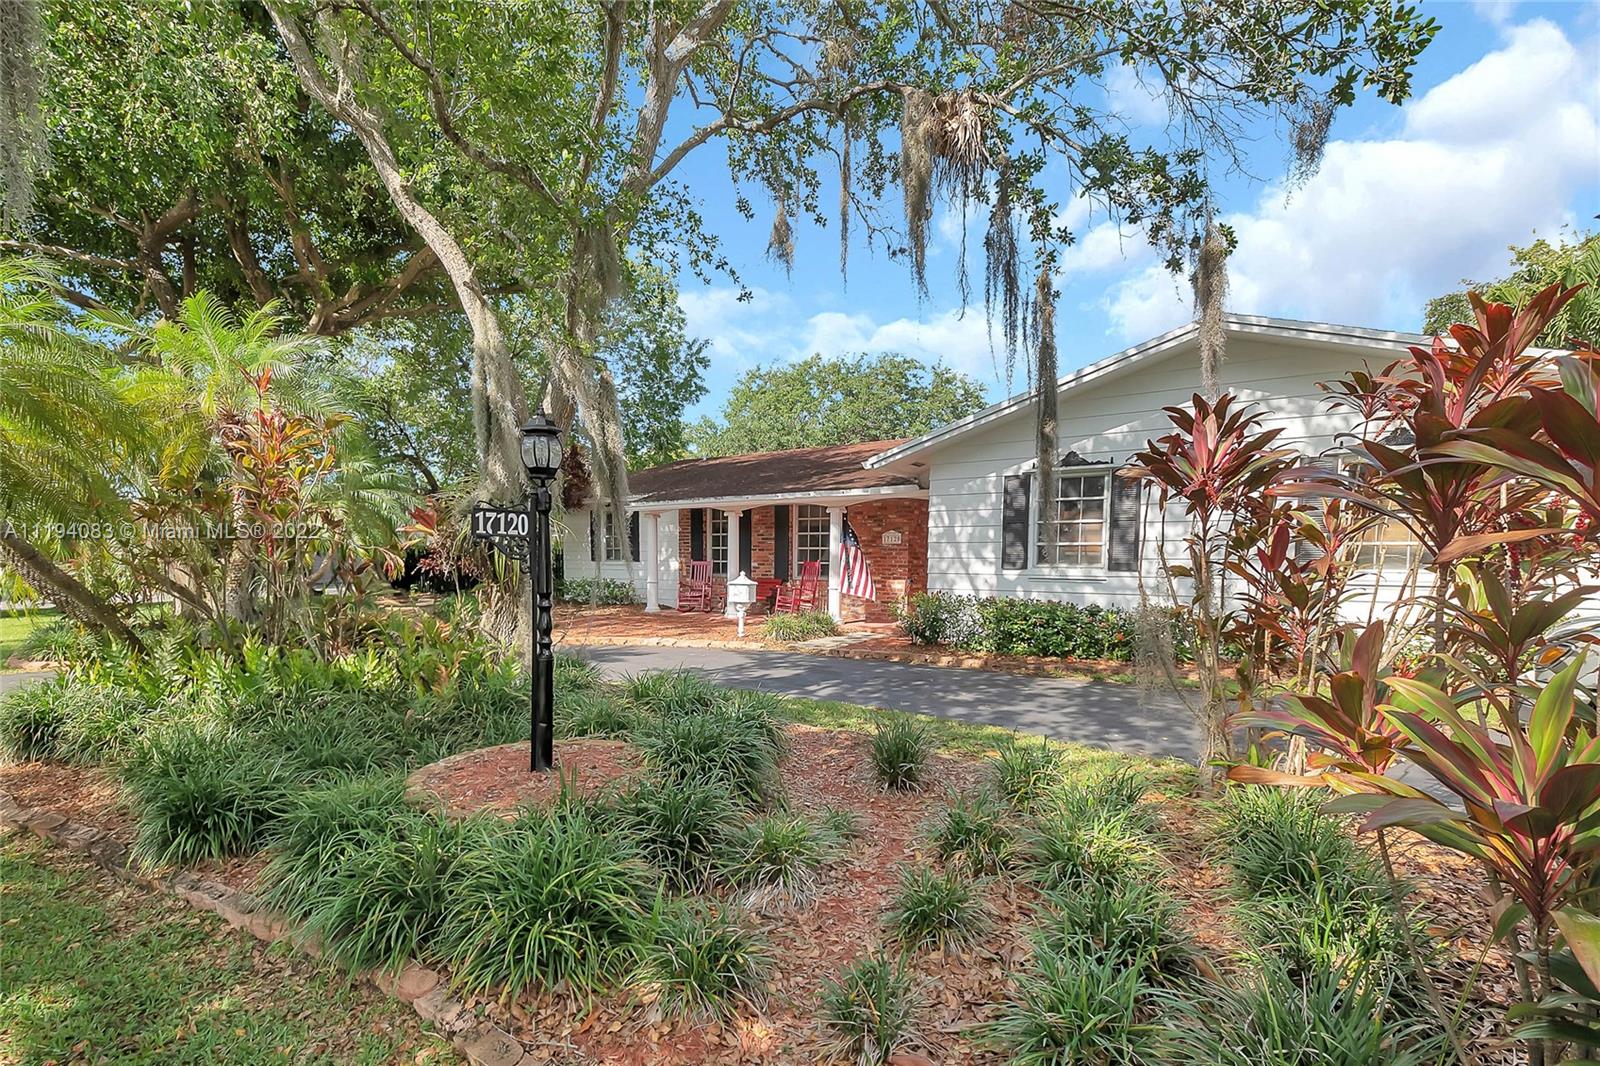 Charming colonial style, 3 bedroom/ 2 bathroom canal front home in Palmetto Bay. Formal living and dining rooms. Kitchen features wood cabinetry, granite counter tops, stone backsplash eat in breakfast area. Family room has accent brick wall, wet bar and sliding glass doors out to the pool. Lovely master suite with walk in closet , master bath has dual sink vanity and shower. Tile and laminate flooring. Wonderful fenced,  tropical landscaped yard with deep covered patio and pool. Circular driveway, 2.5 car side entry garage.